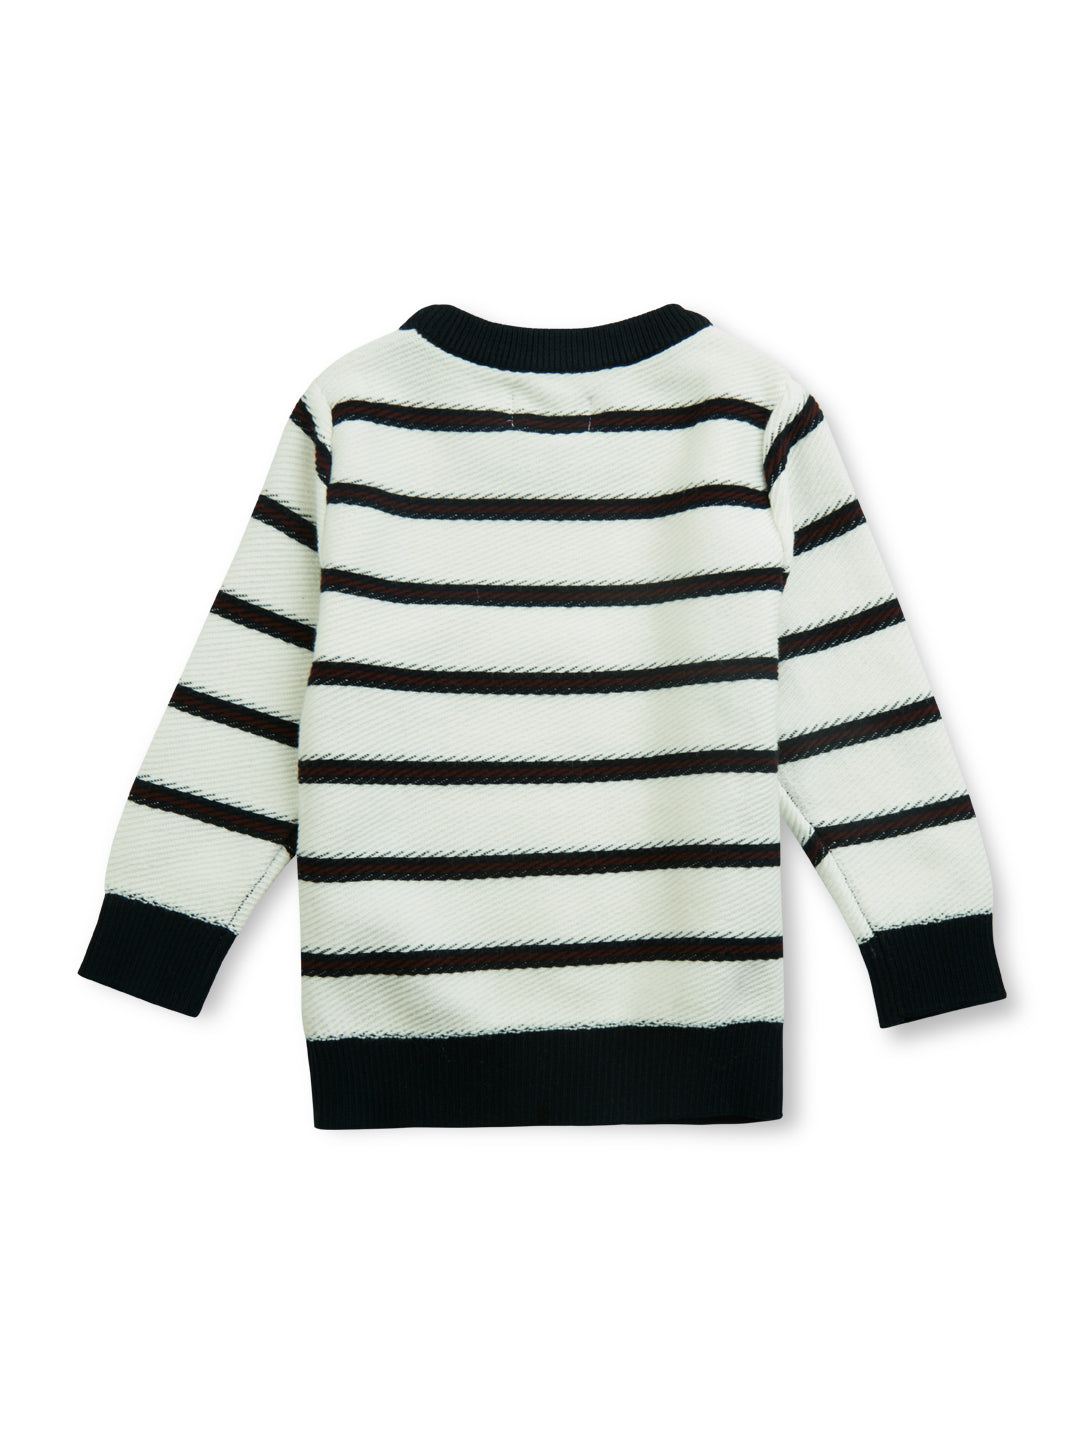 Girls White Striped Cotton Full Sleeves Sweater